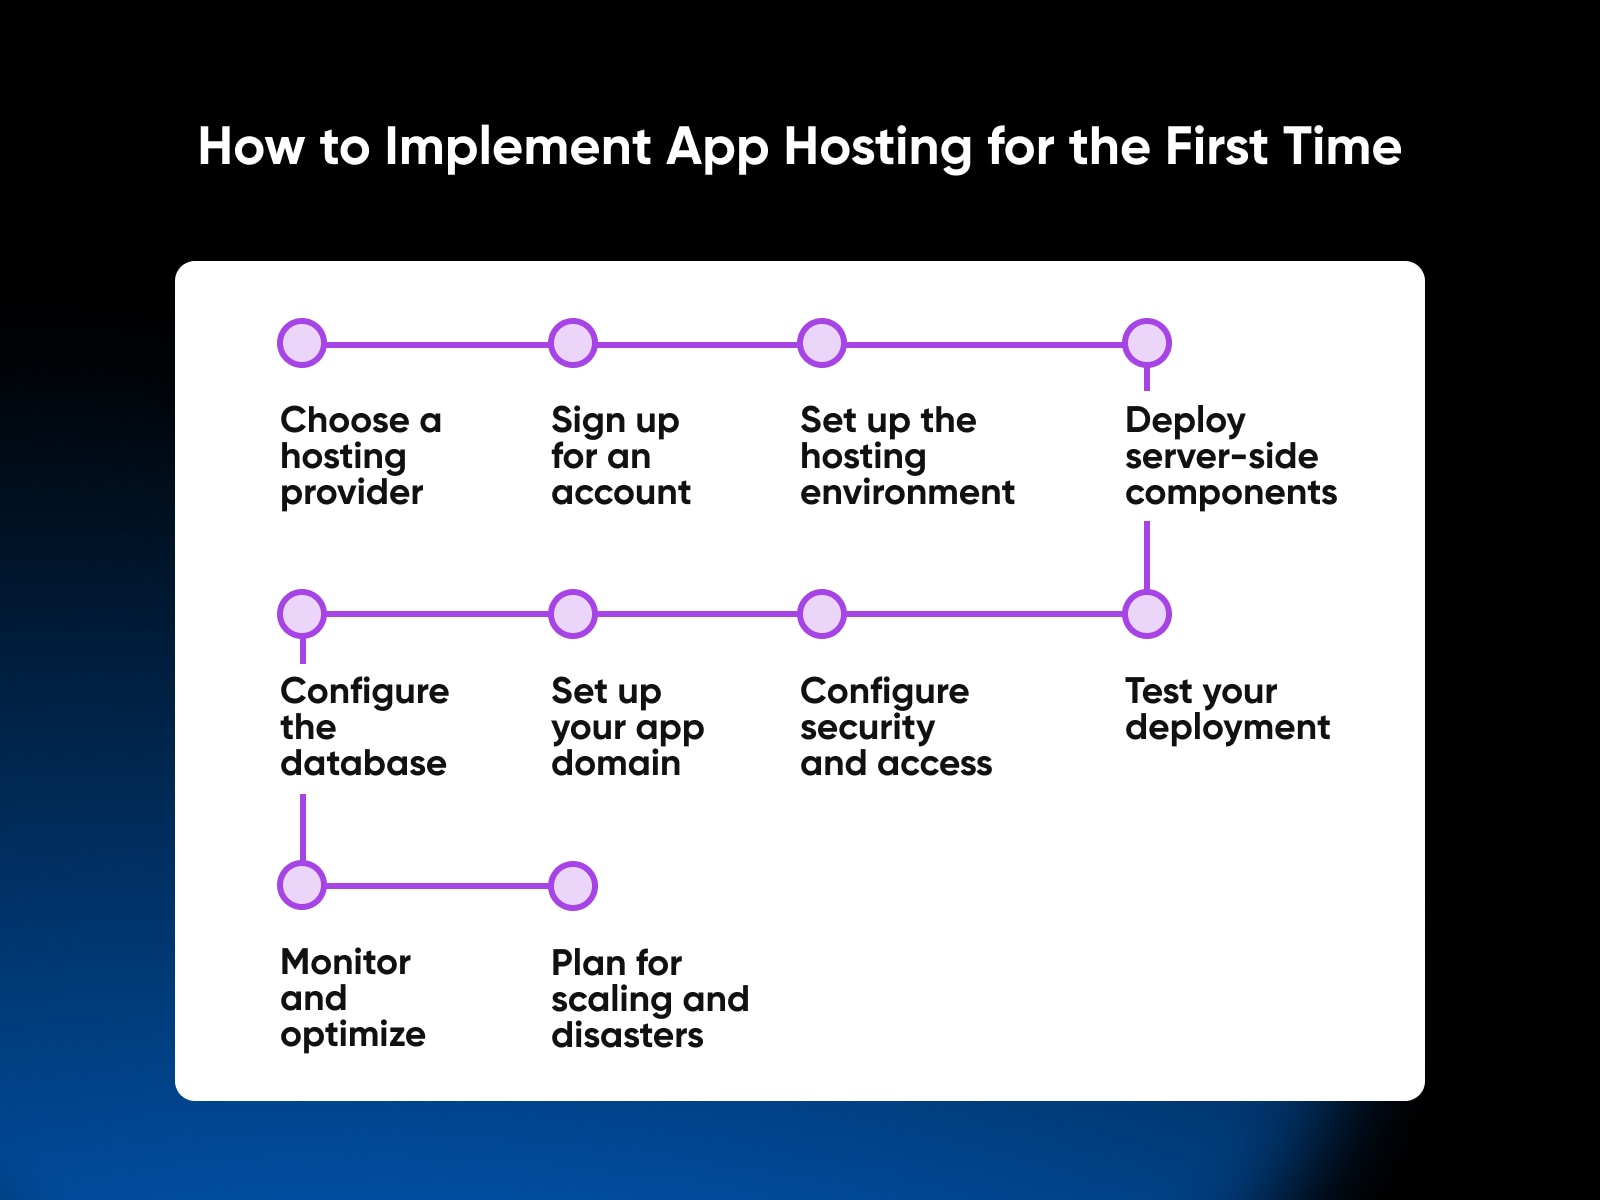 How to Implement App Hosting for the First Time